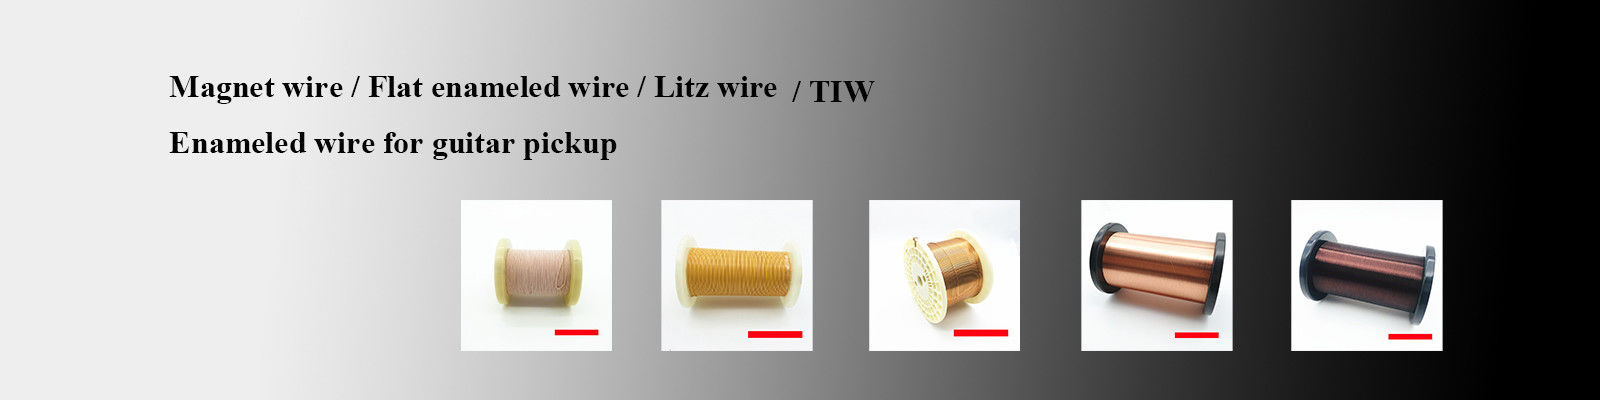 Litz Wire 20/38 Enameled copper wire twisted-pair AWG38 X 20 Strands #A36O LW